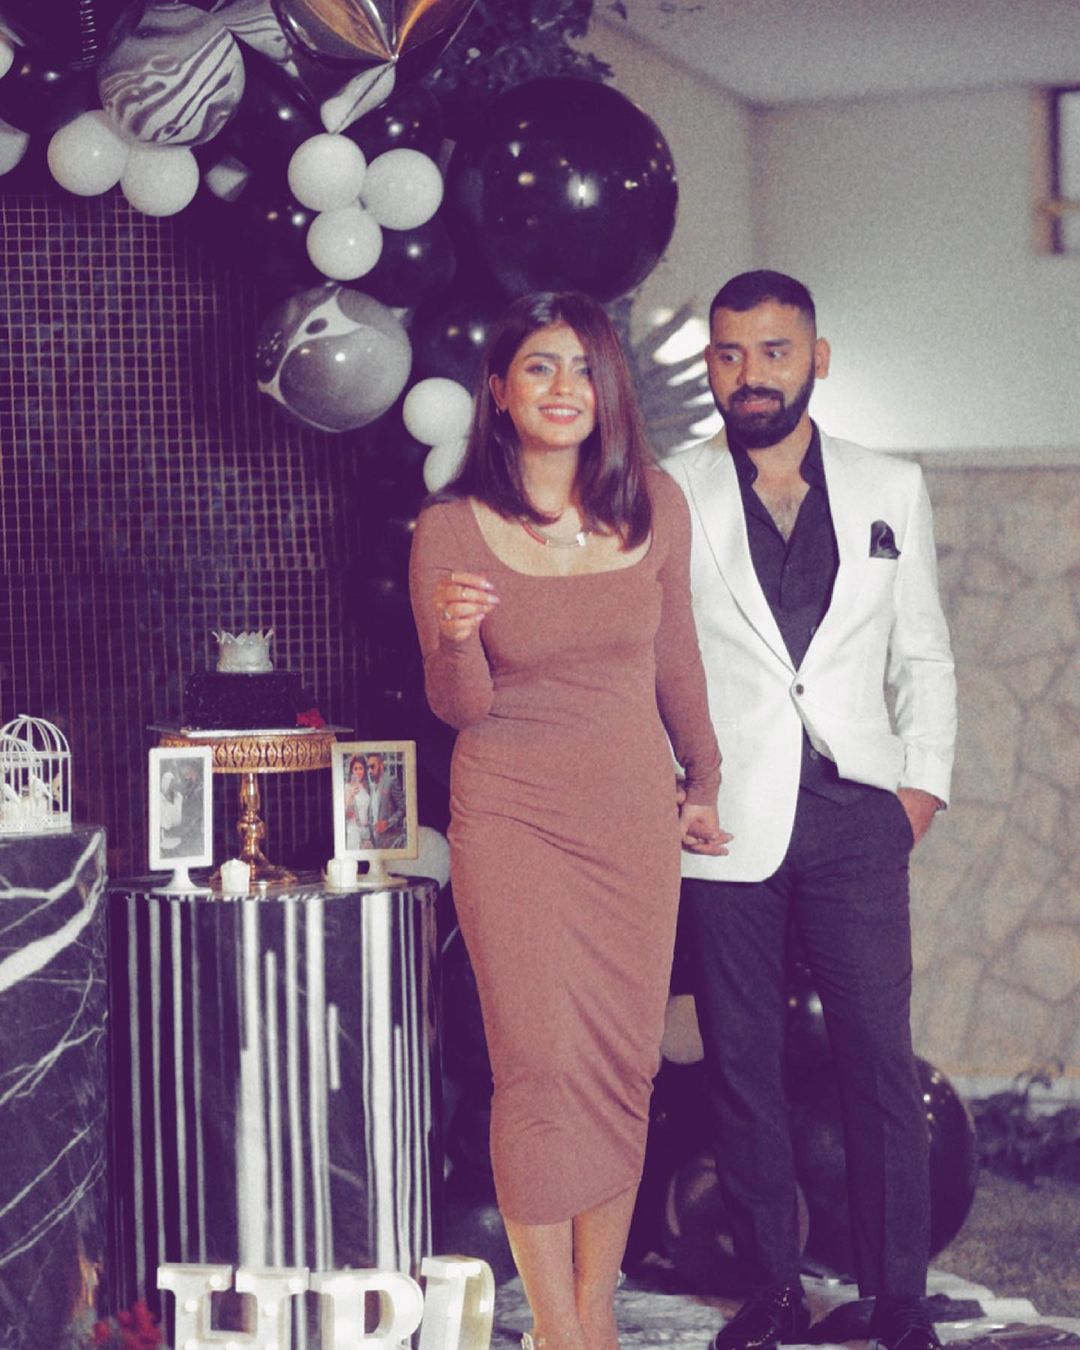 Anumta Qureshi with her Husband on Their Birthday Party